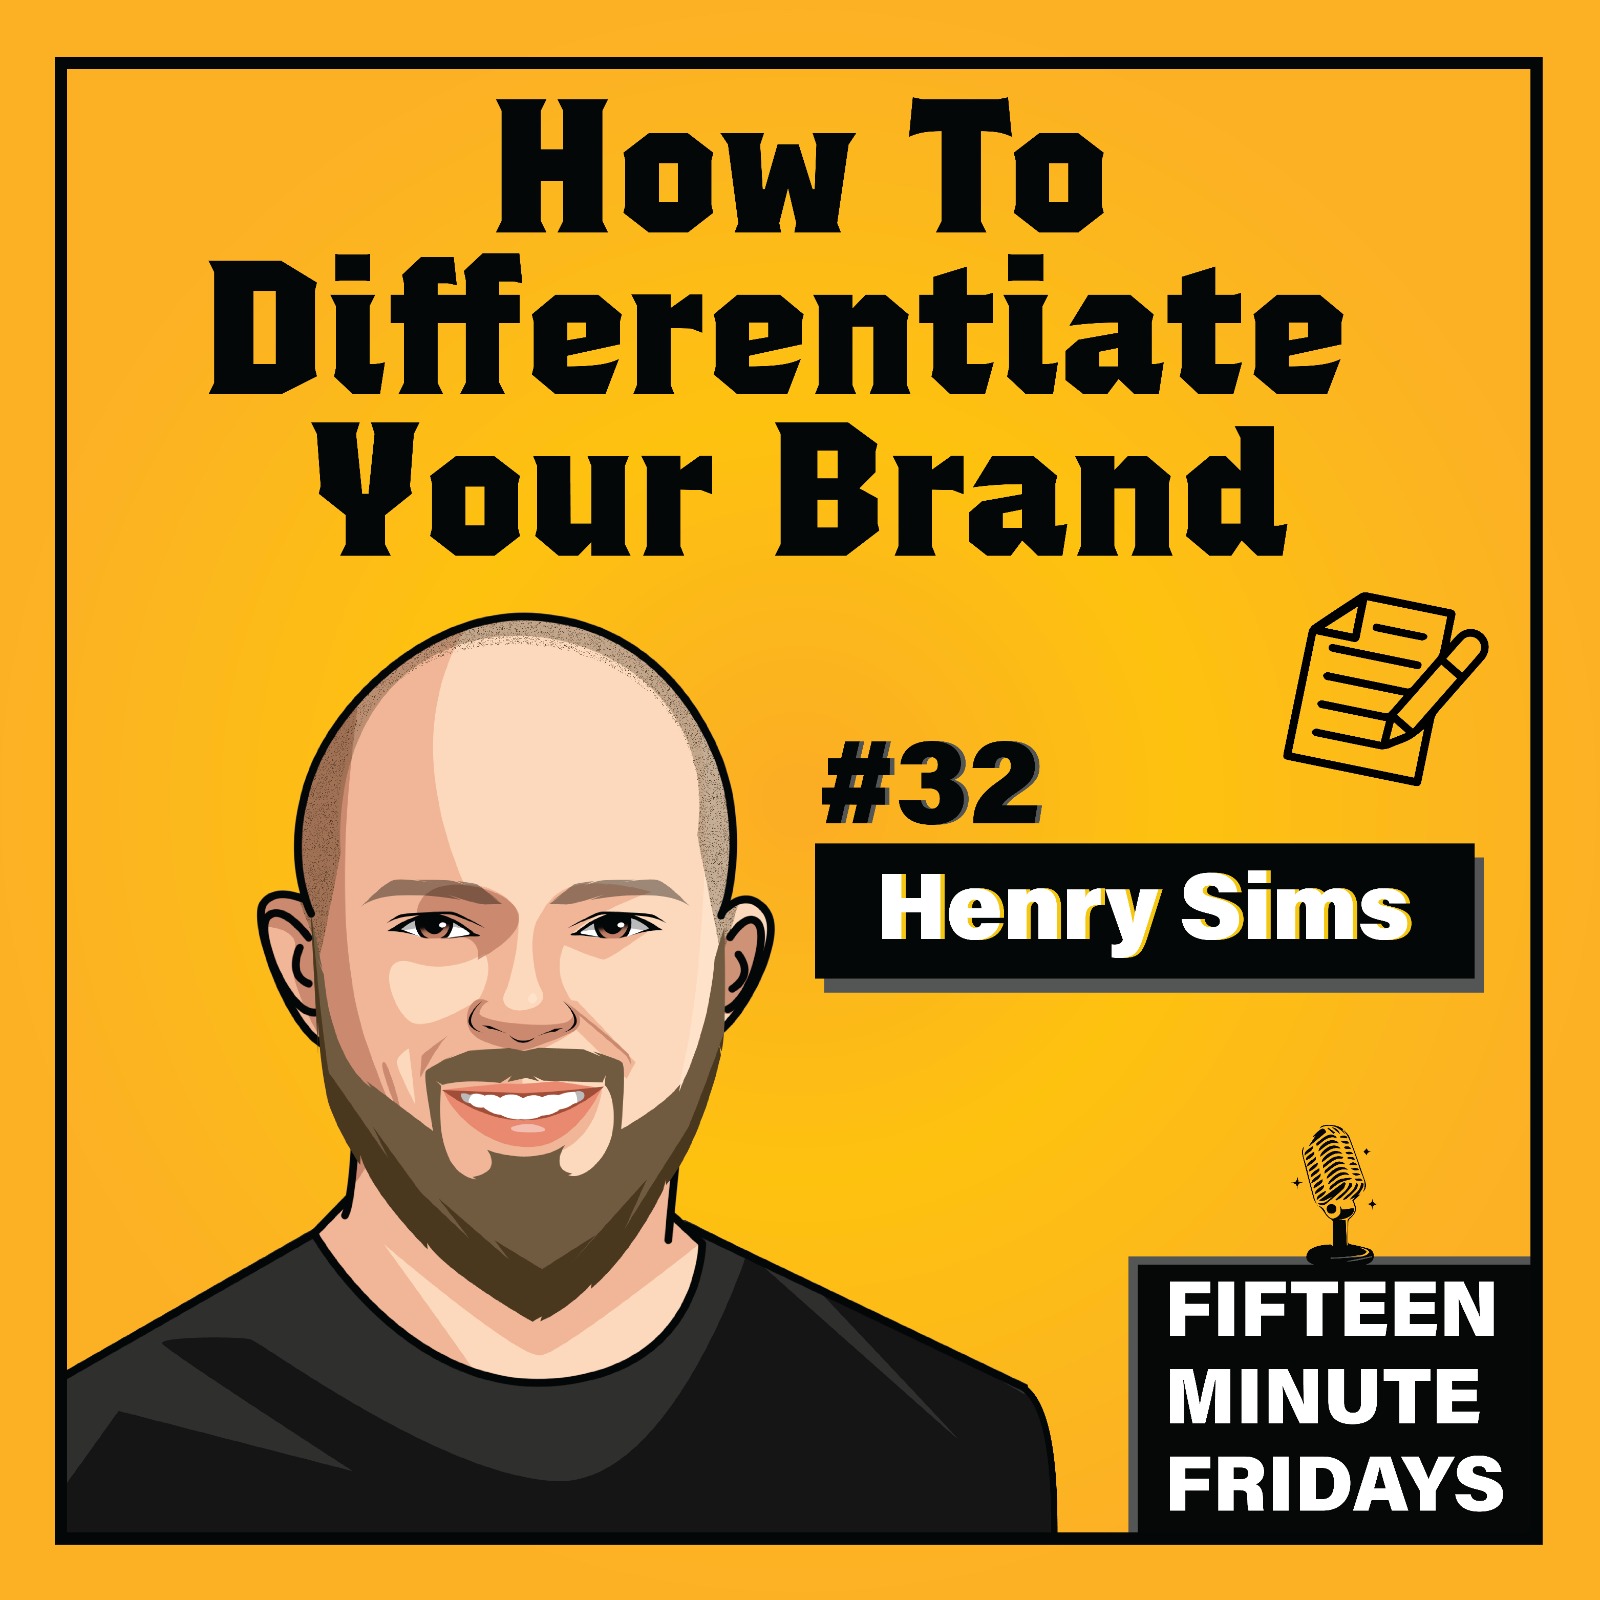 Henry Sims|| How To Differentiate Your Brand